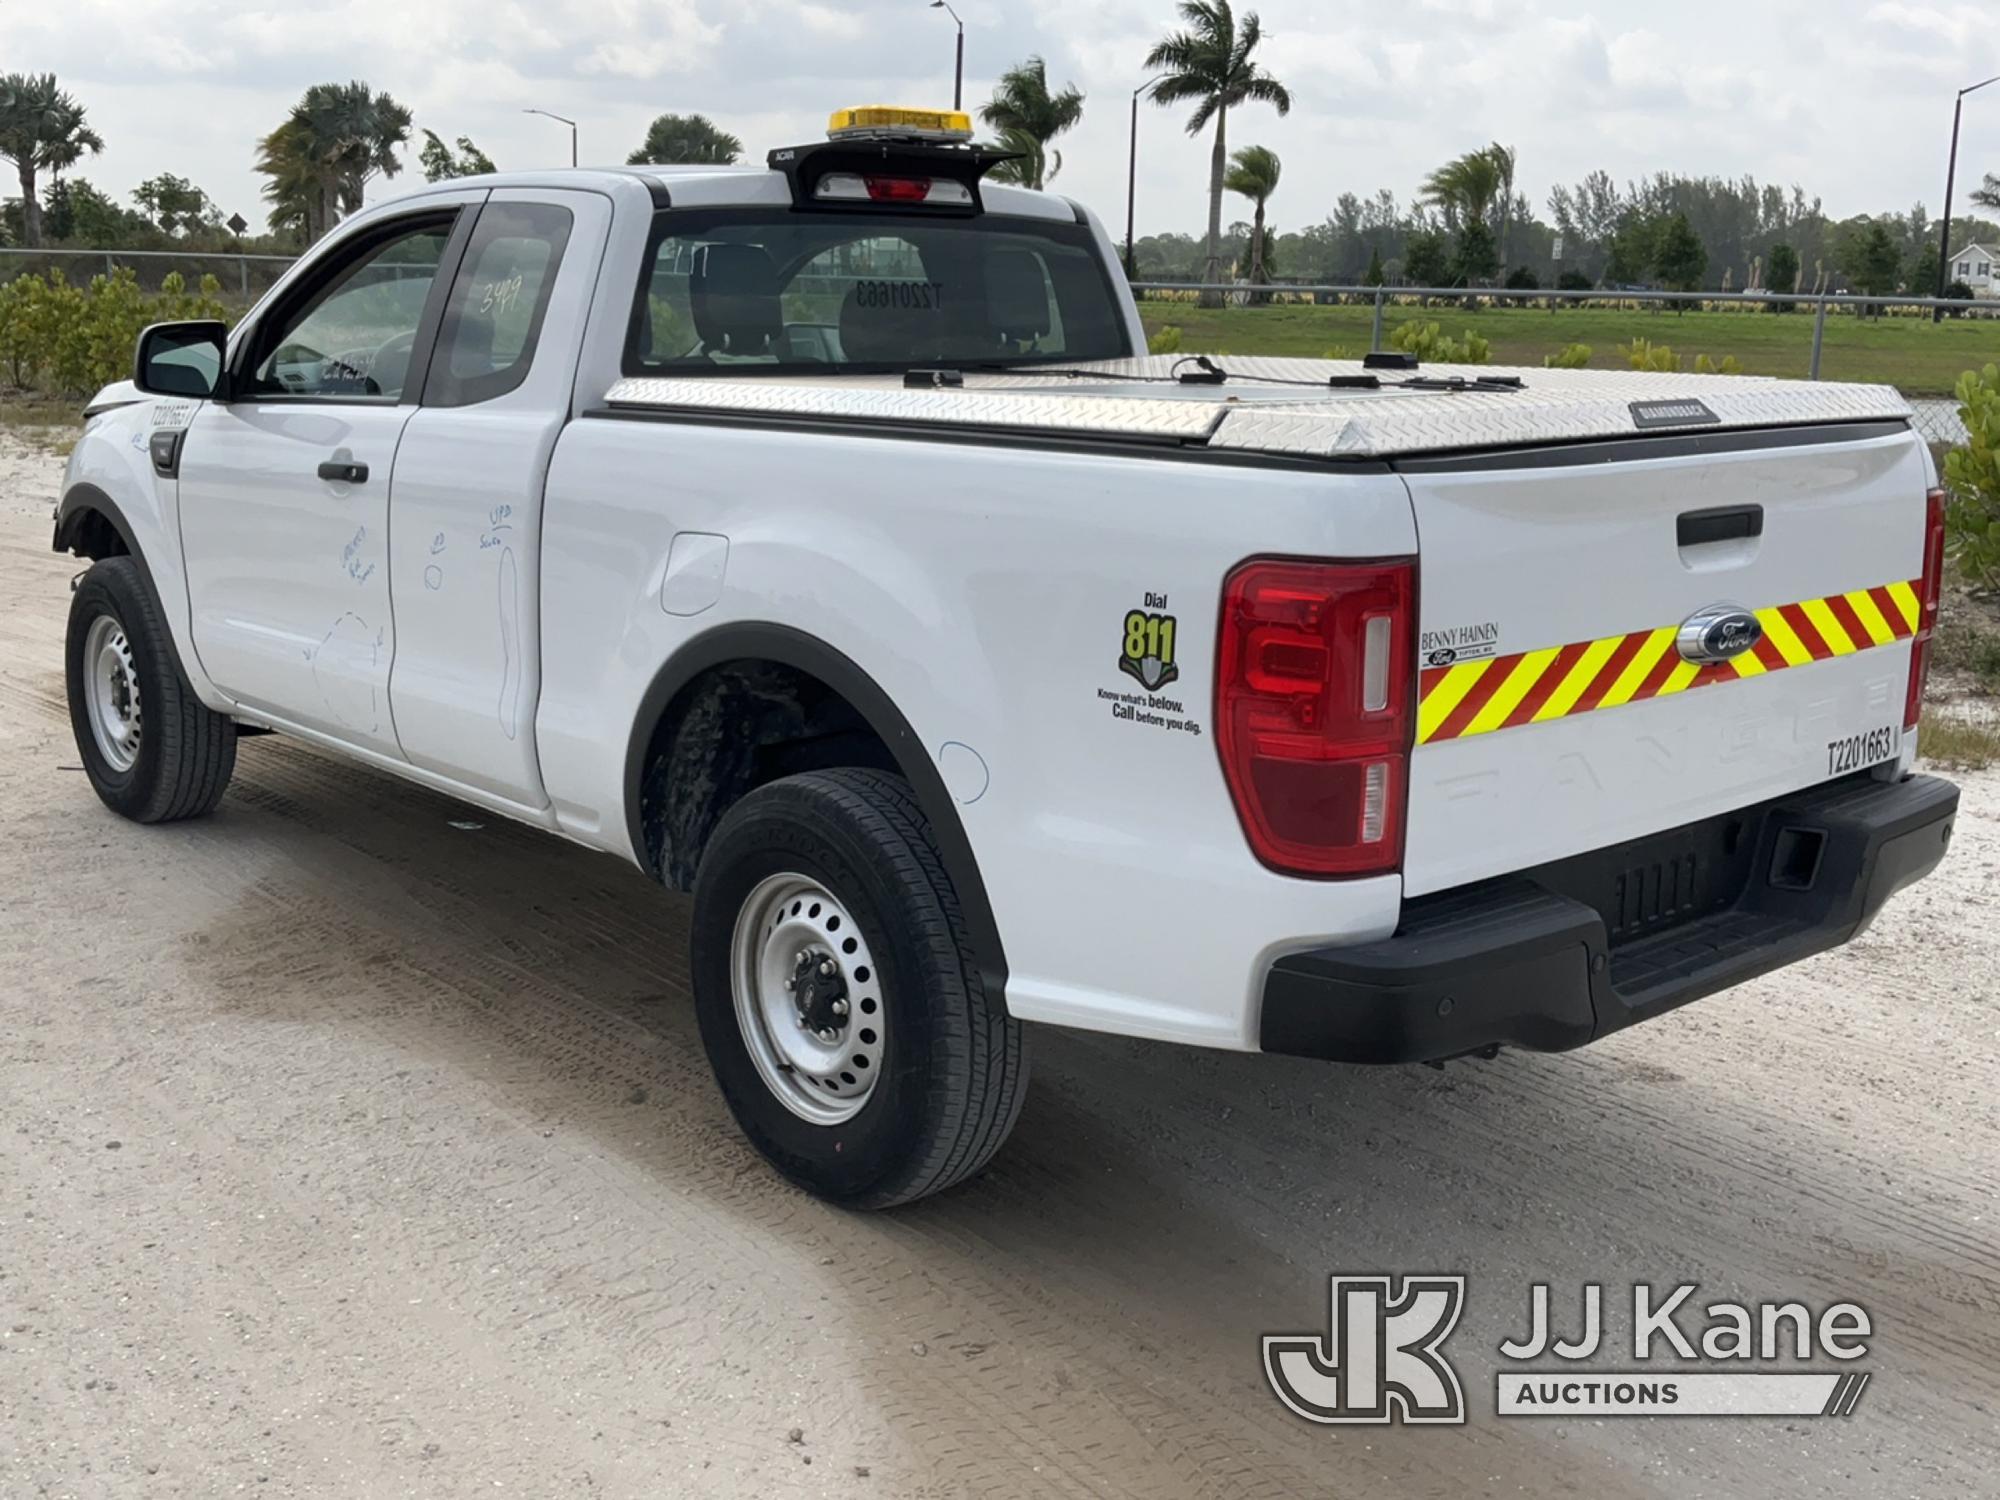 (Westlake, FL) 2022 Ford Ranger Extended-Cab Pickup Truck Runs & Moves, Vehicle Front End Wrecked, T